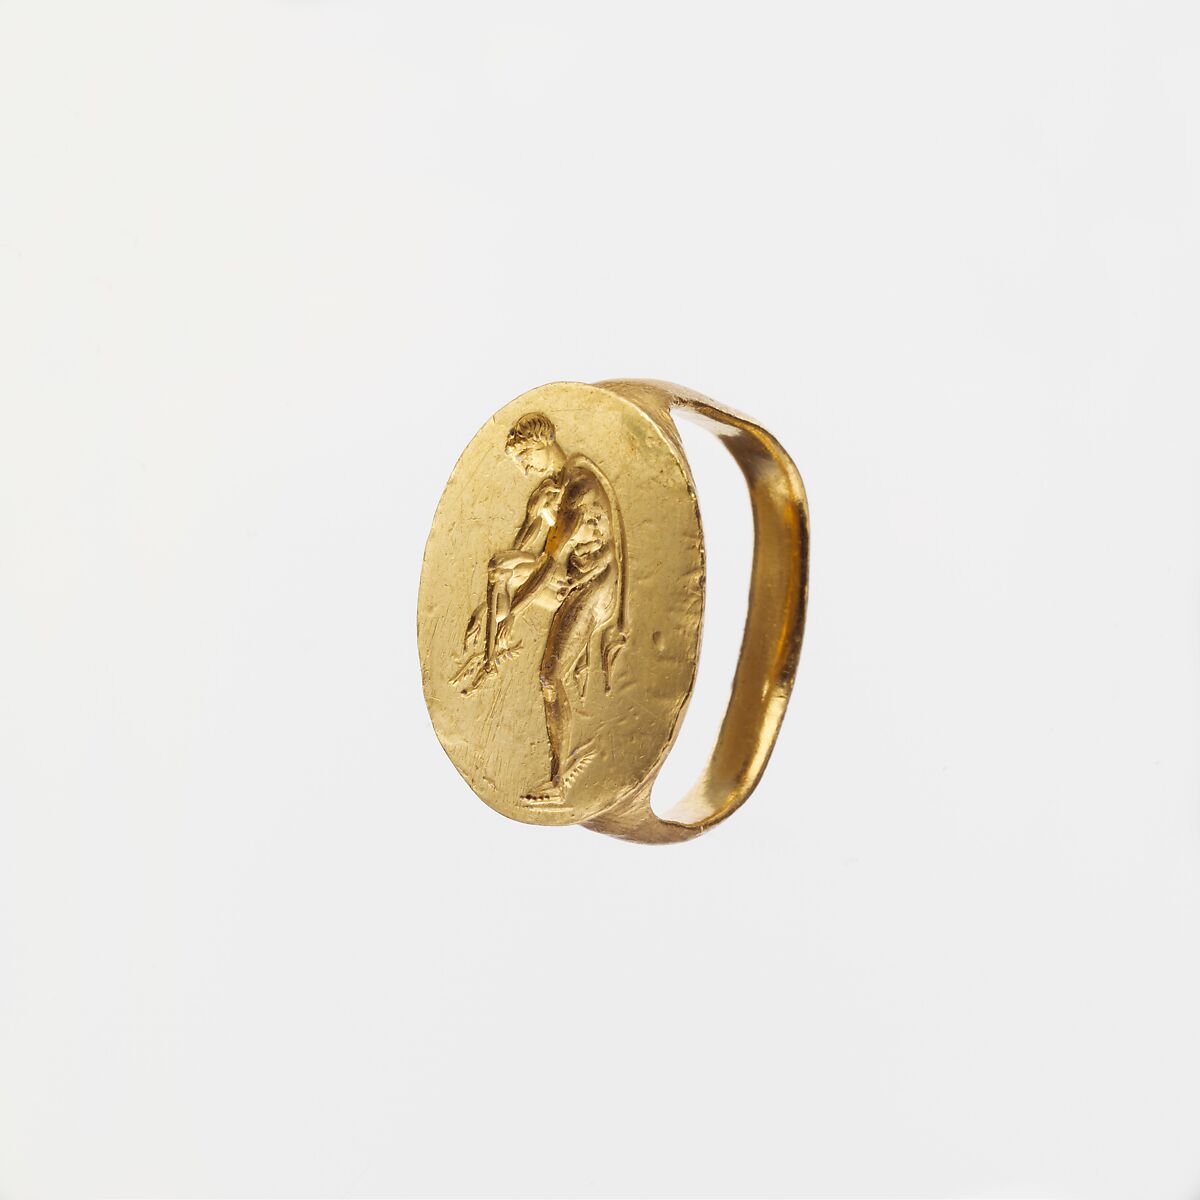 Gold finger ring engraved with an image of Hermes